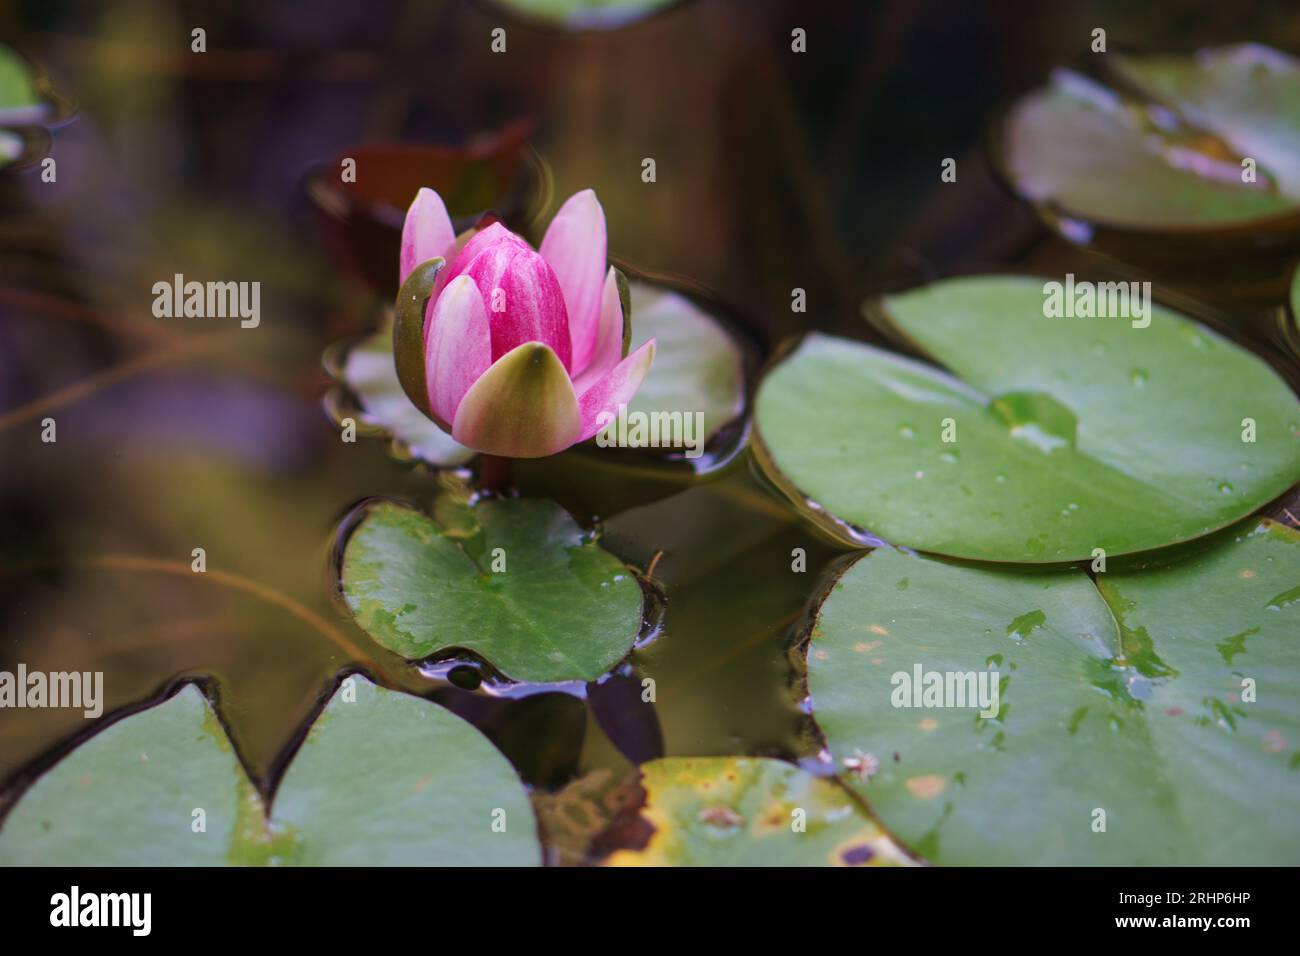 Pink water lily blooming on a pond, surrounded by water leaves Stock Photo